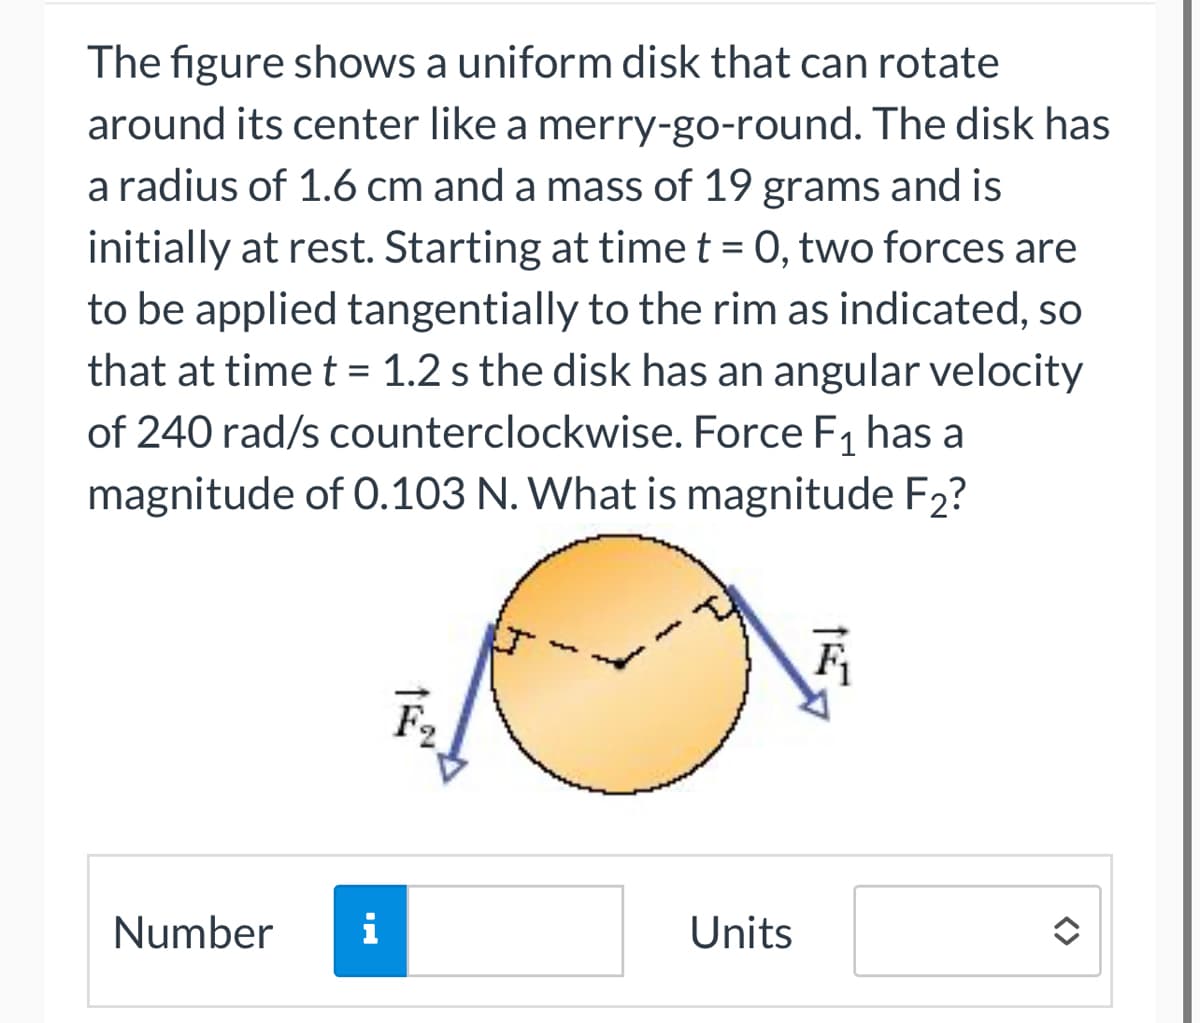 The figure shows a uniform disk that can rotate
around its center like a merry-go-round. The disk has
a radius of 1.6 cm and a mass of 19 grams and is
initially at rest. Starting at time t = 0, two forces are
to be applied tangentially to the rim as indicated, so
that at time t = 1.2 s the disk has an angular velocity
of 240 rad/s counterclockwise. Force F₁ has a
magnitude of 0.103 N. What is magnitude F2?
Number
i
Units
F₁